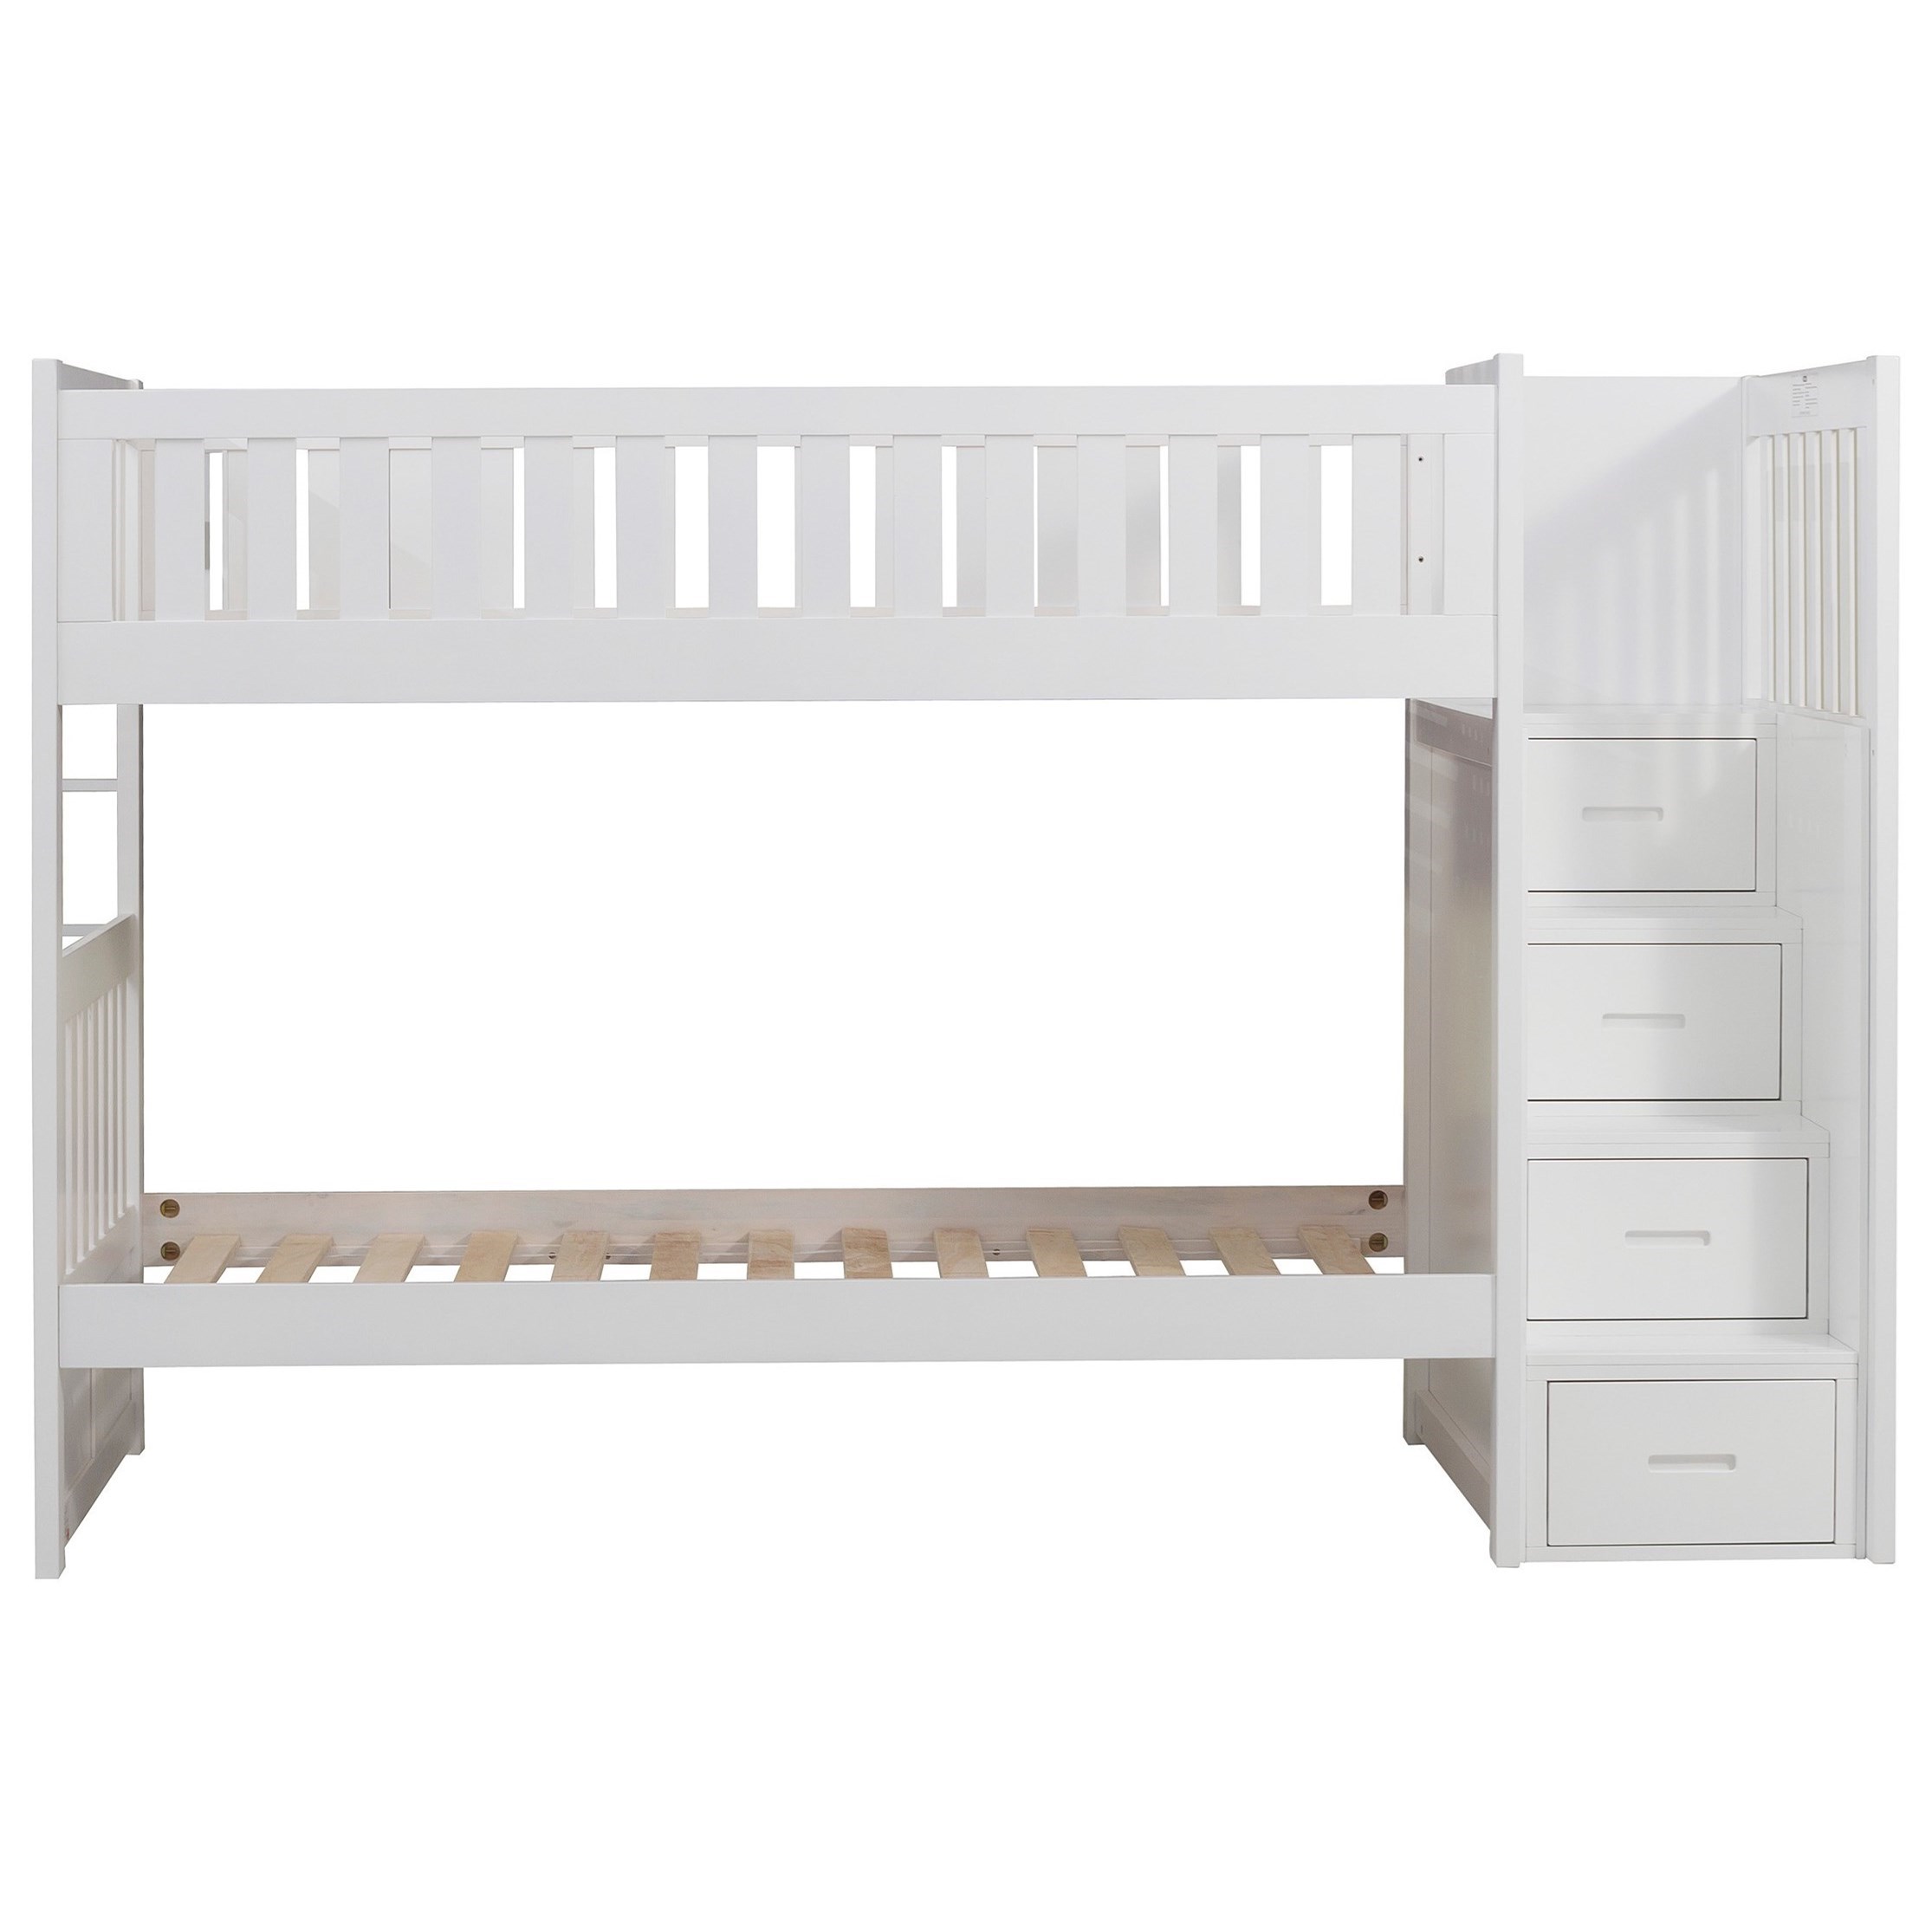 white twin bunk beds with storage